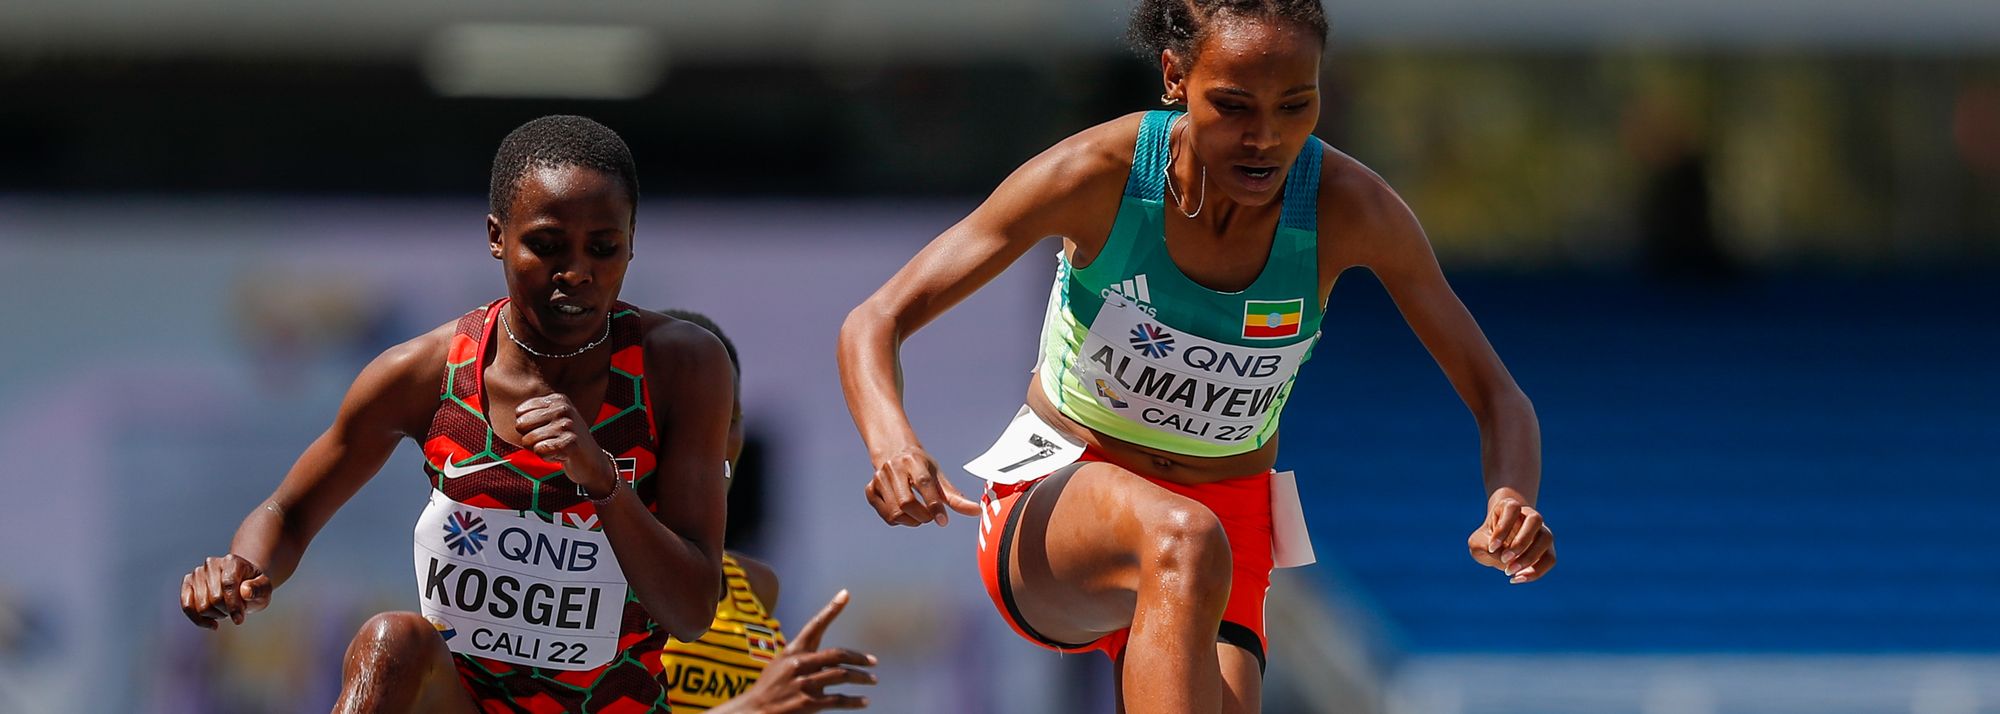 We've already seen some big battles and record-breaking brilliance at the World Athletics U20 Championships Cali 22 and there’s much more in store on day four